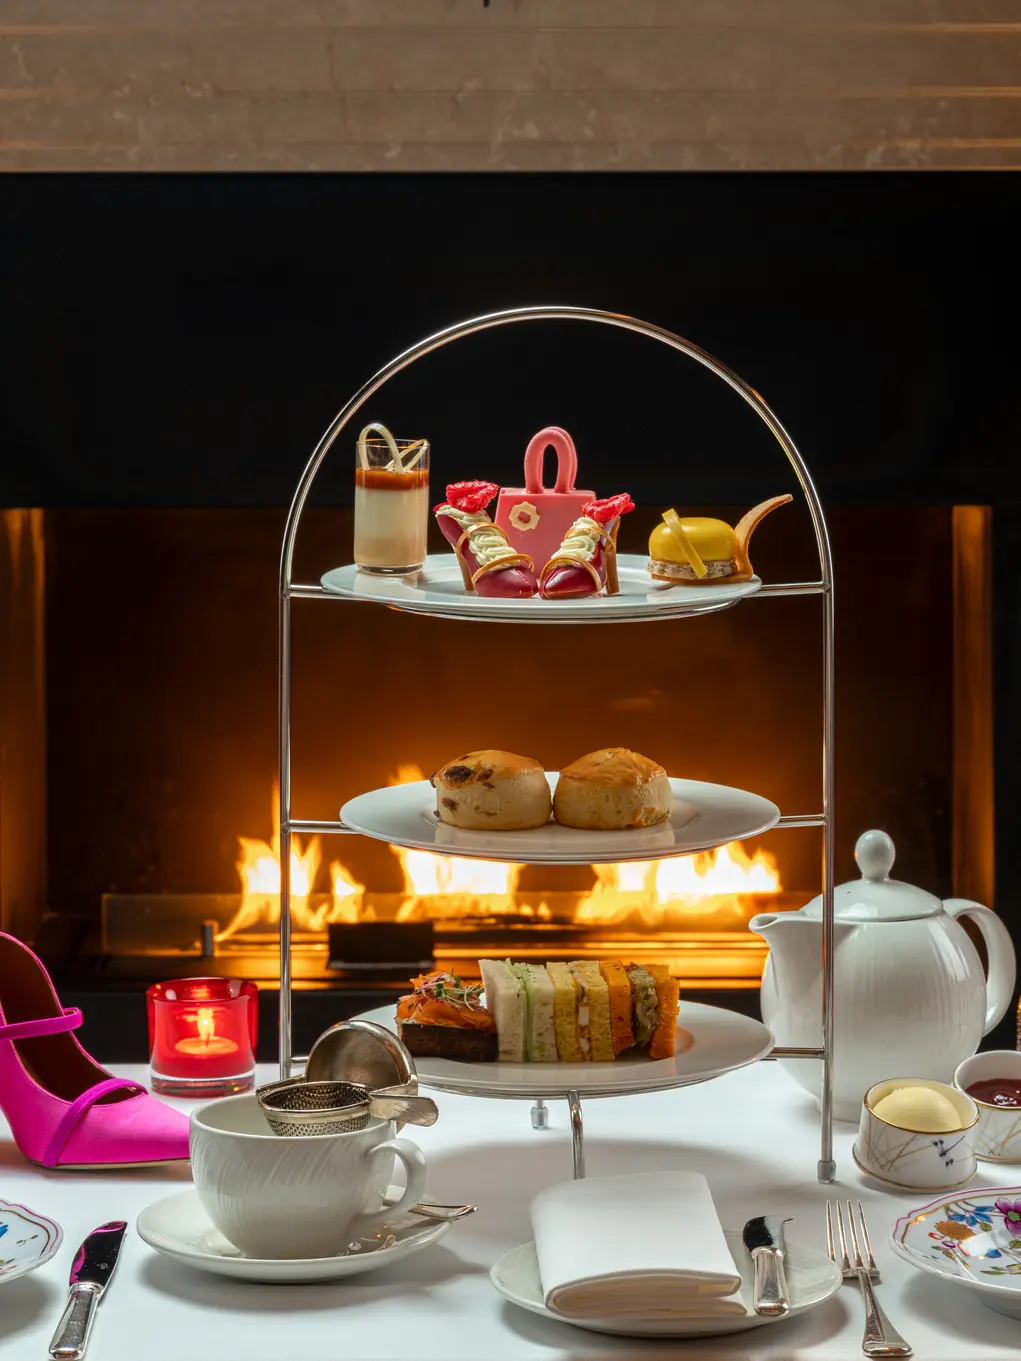 Mothers day afternoon tea in Mayfair London